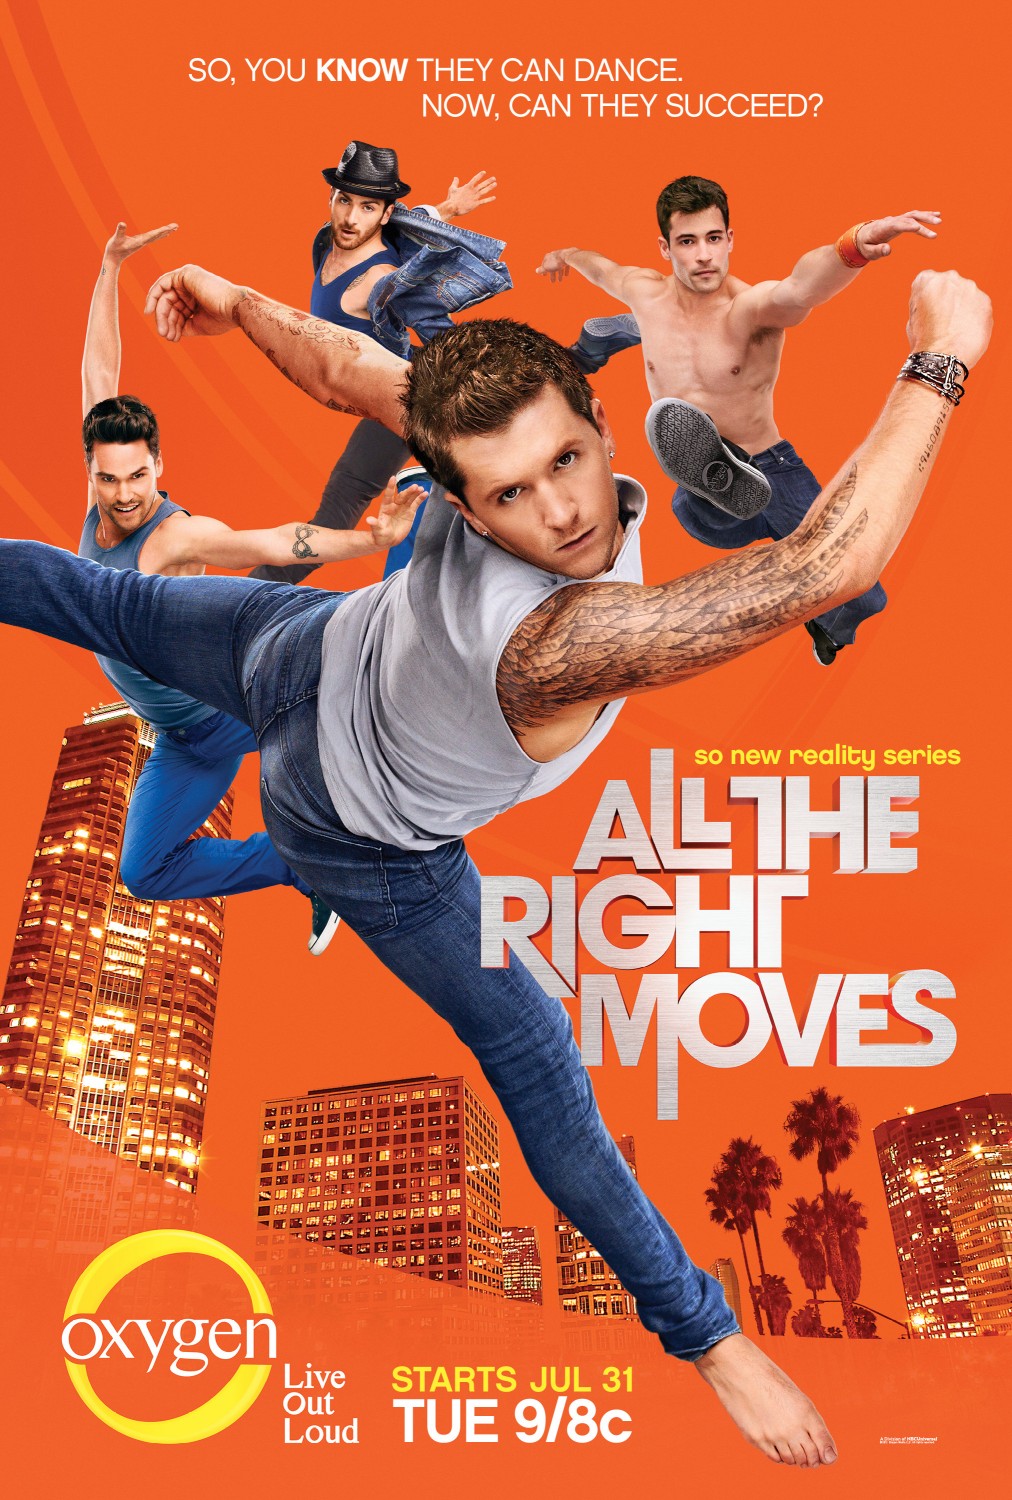 All the Right Moves - Co-Executive Producer